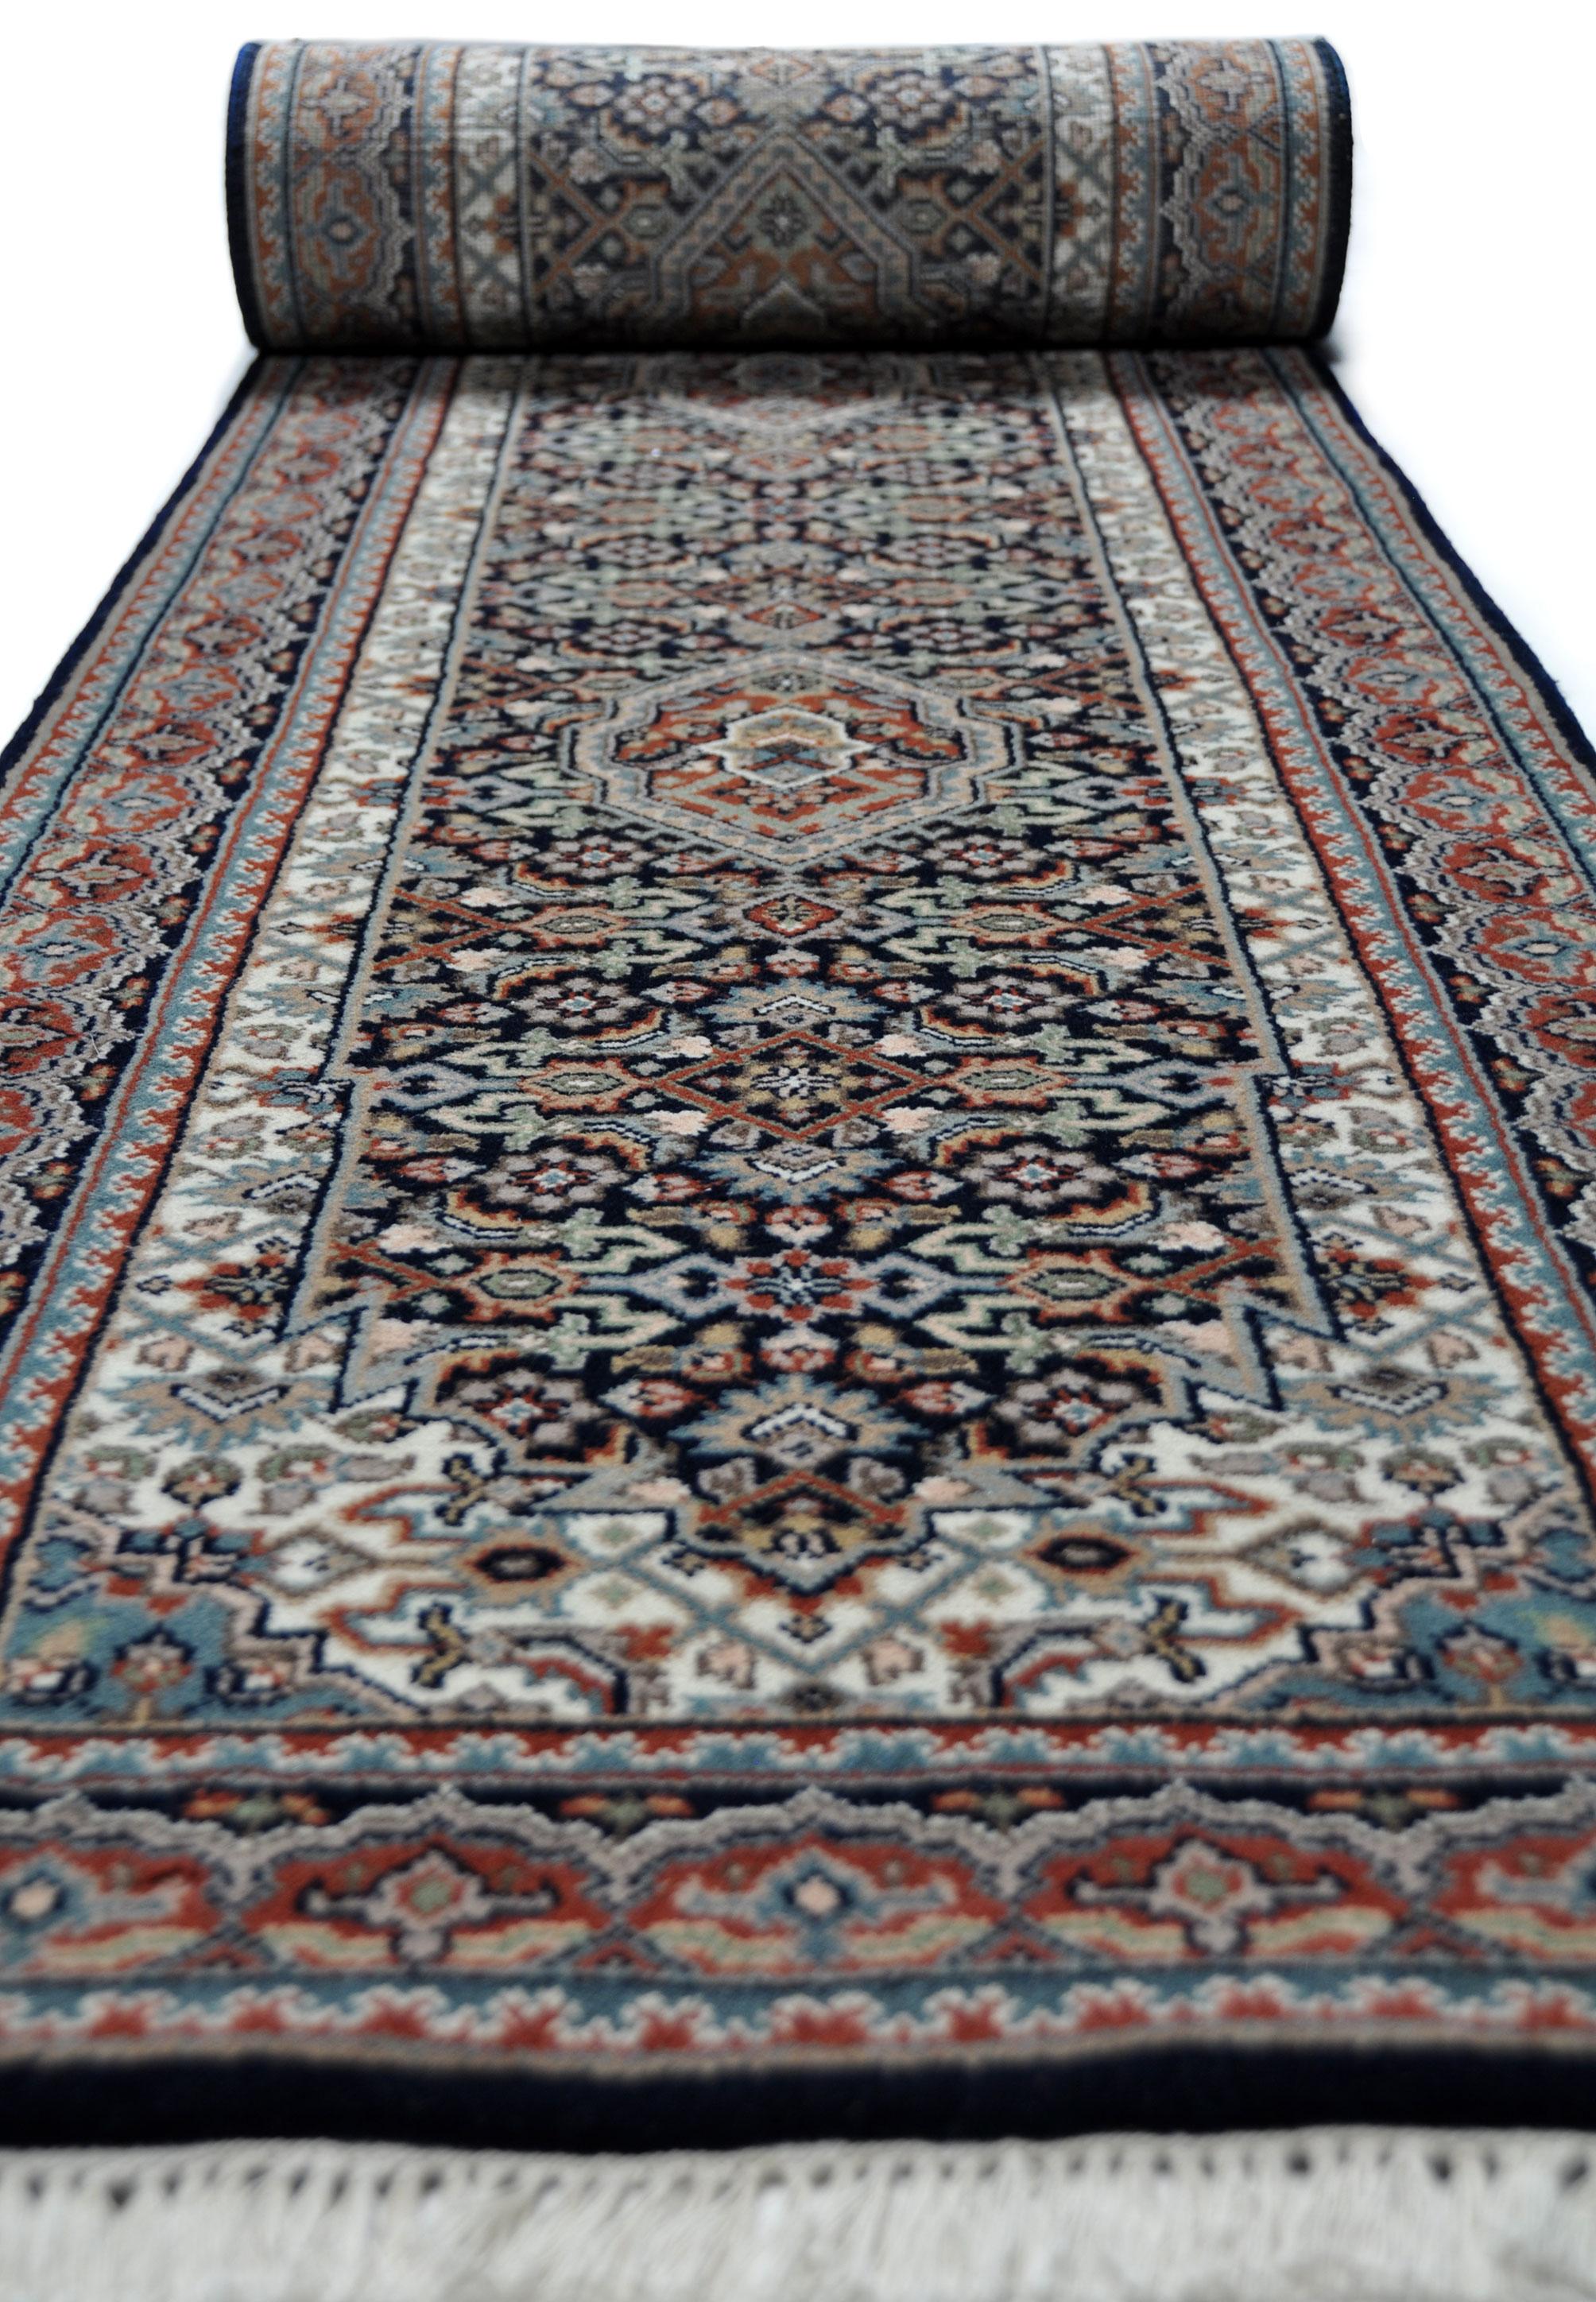 A Bidjar rug takes its name from a small Kurdish city west of Iran. Bidjar, also known as Bijar, is a trading area to the north-west of Iran and lies in an important weaving area. The influences of the artistic Kurds are clearly reflected in the